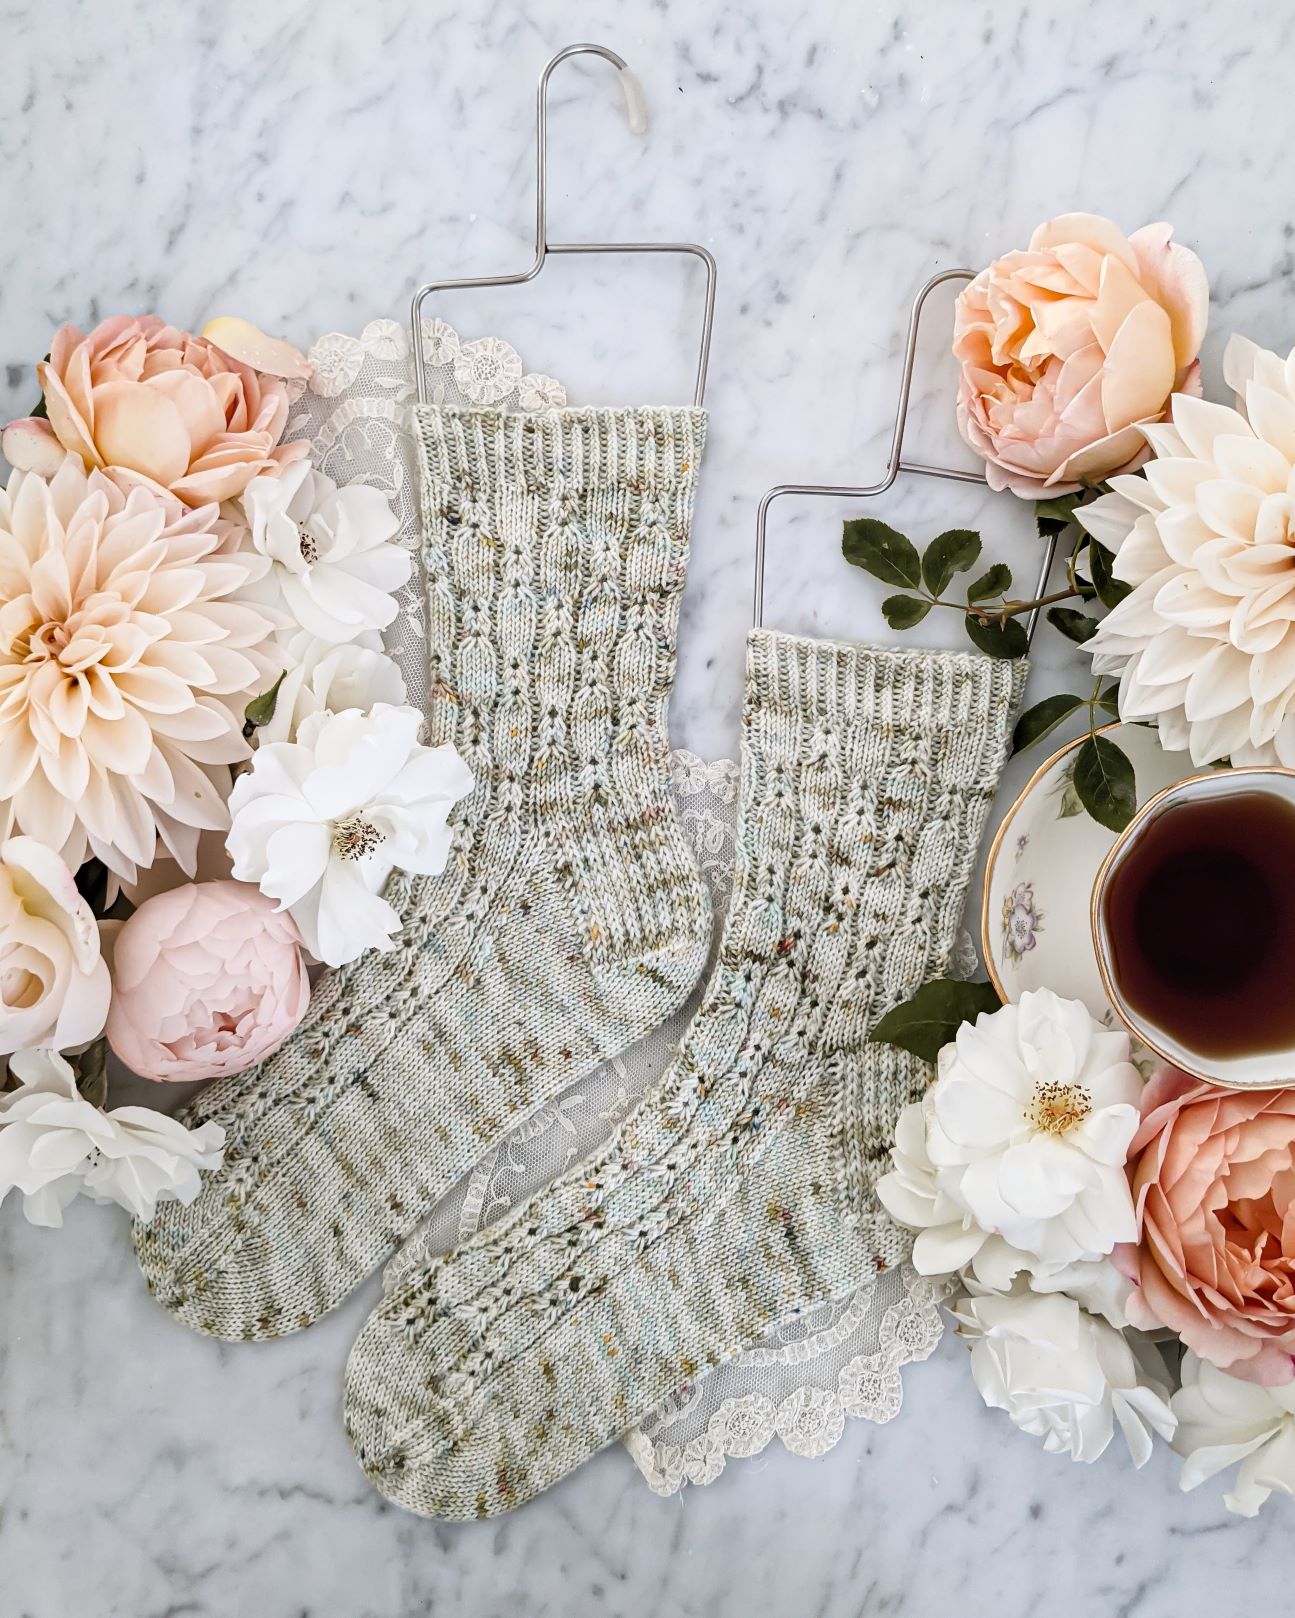 A pair of speckled, pale green socks with columns of eyelet details is laid flat on a white marble surface. Both toes point to the left. They are surrounded by creamy dahlias, peach and white roses, and a white teacup filled with tea.